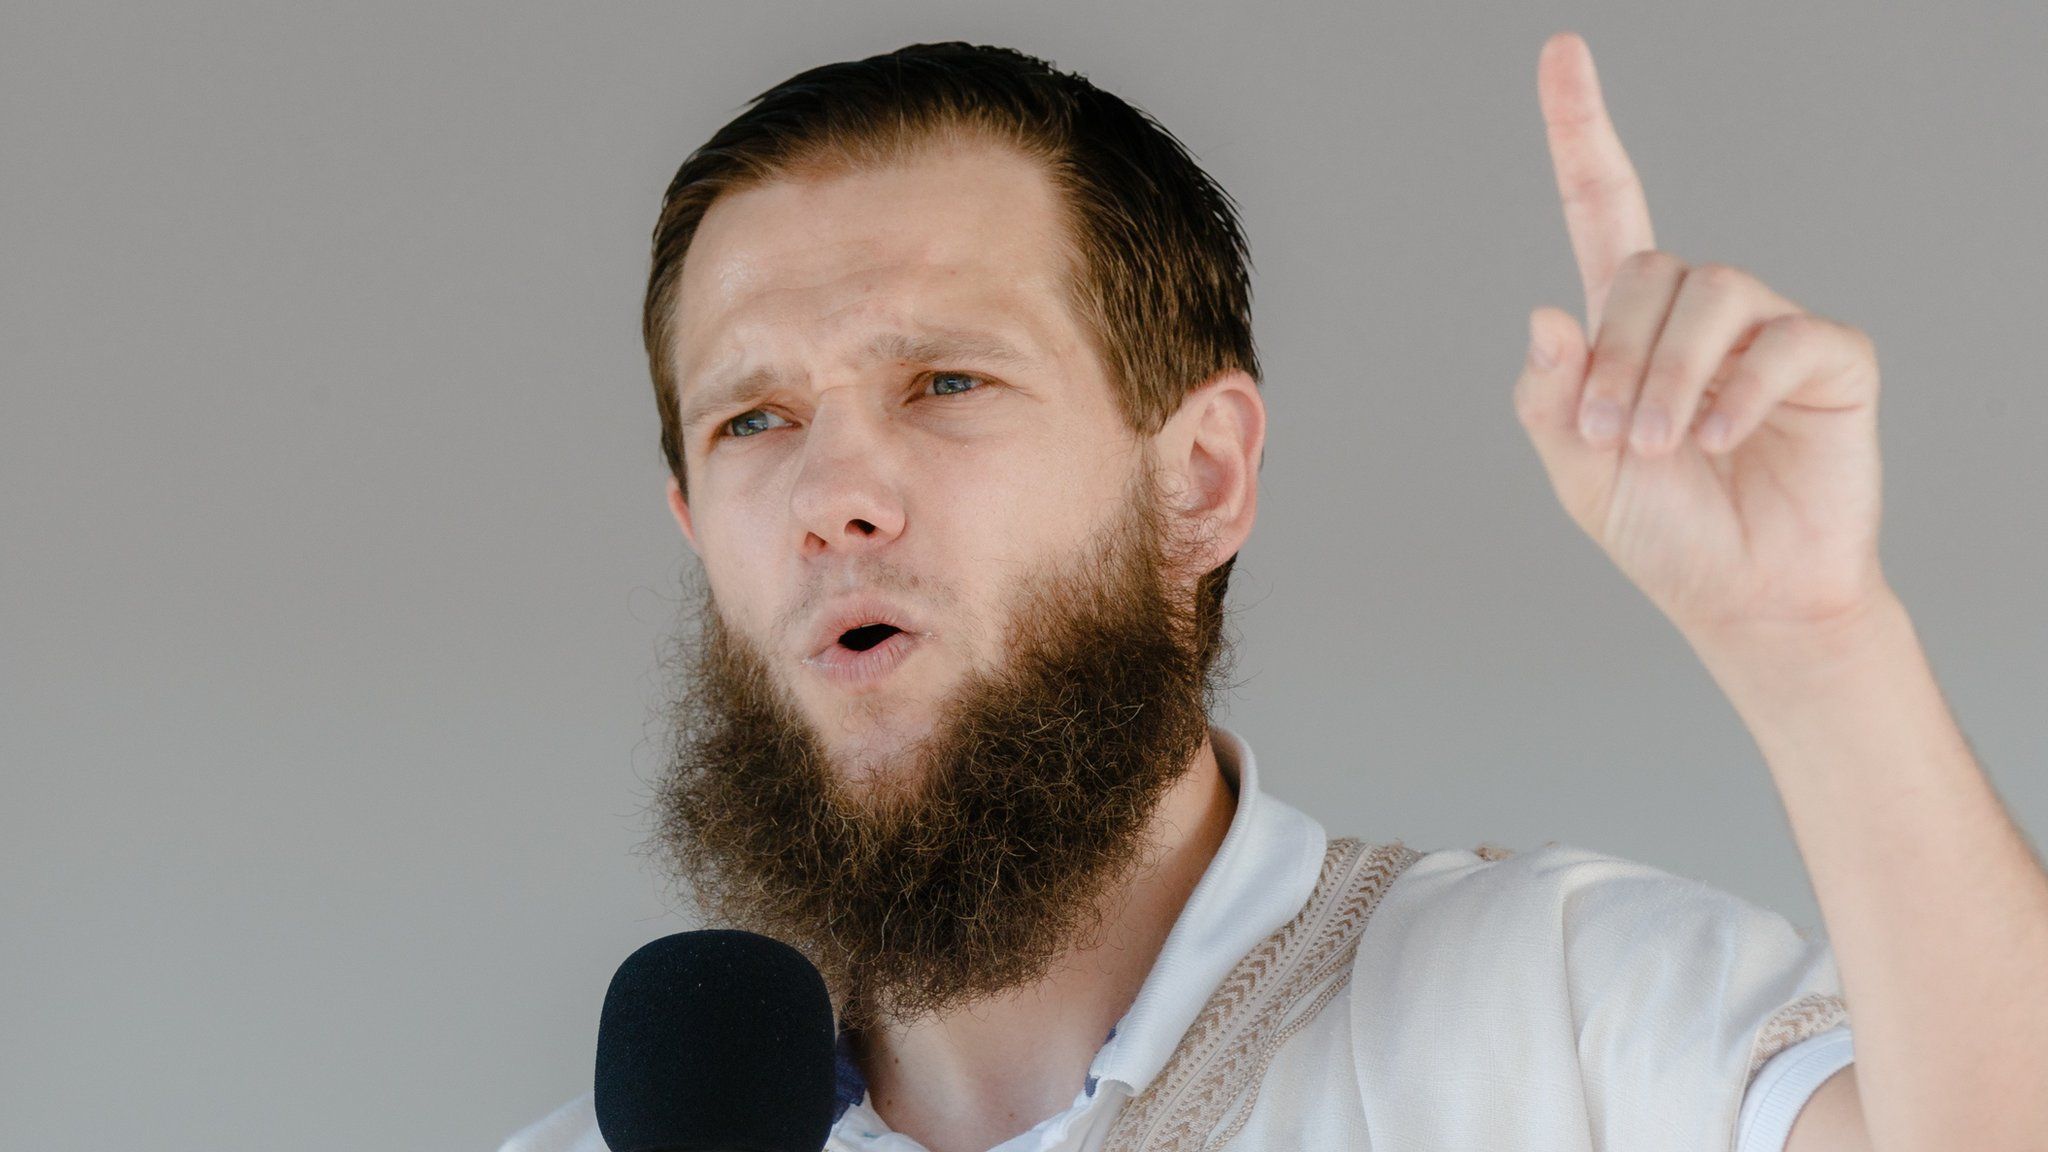 German Islamist Sven Lau delivers a speach during a rally in Hamburg, northern Germany, on 19 July 2014